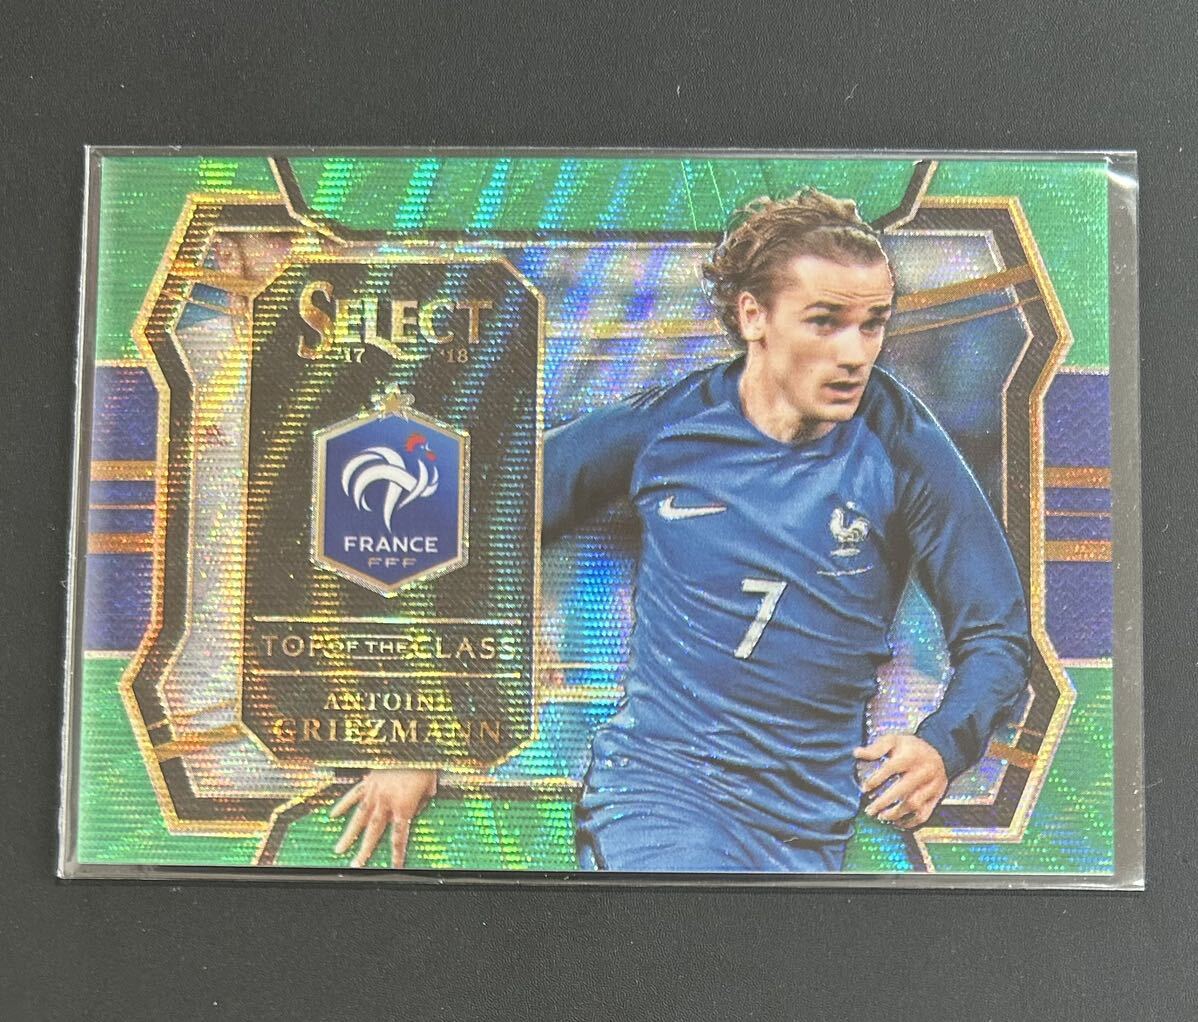 2017-18 Select Soccer Antoine Griezmann France 5/5枚限定 Top of the Class Green Prizm Atletico De Madridの画像1